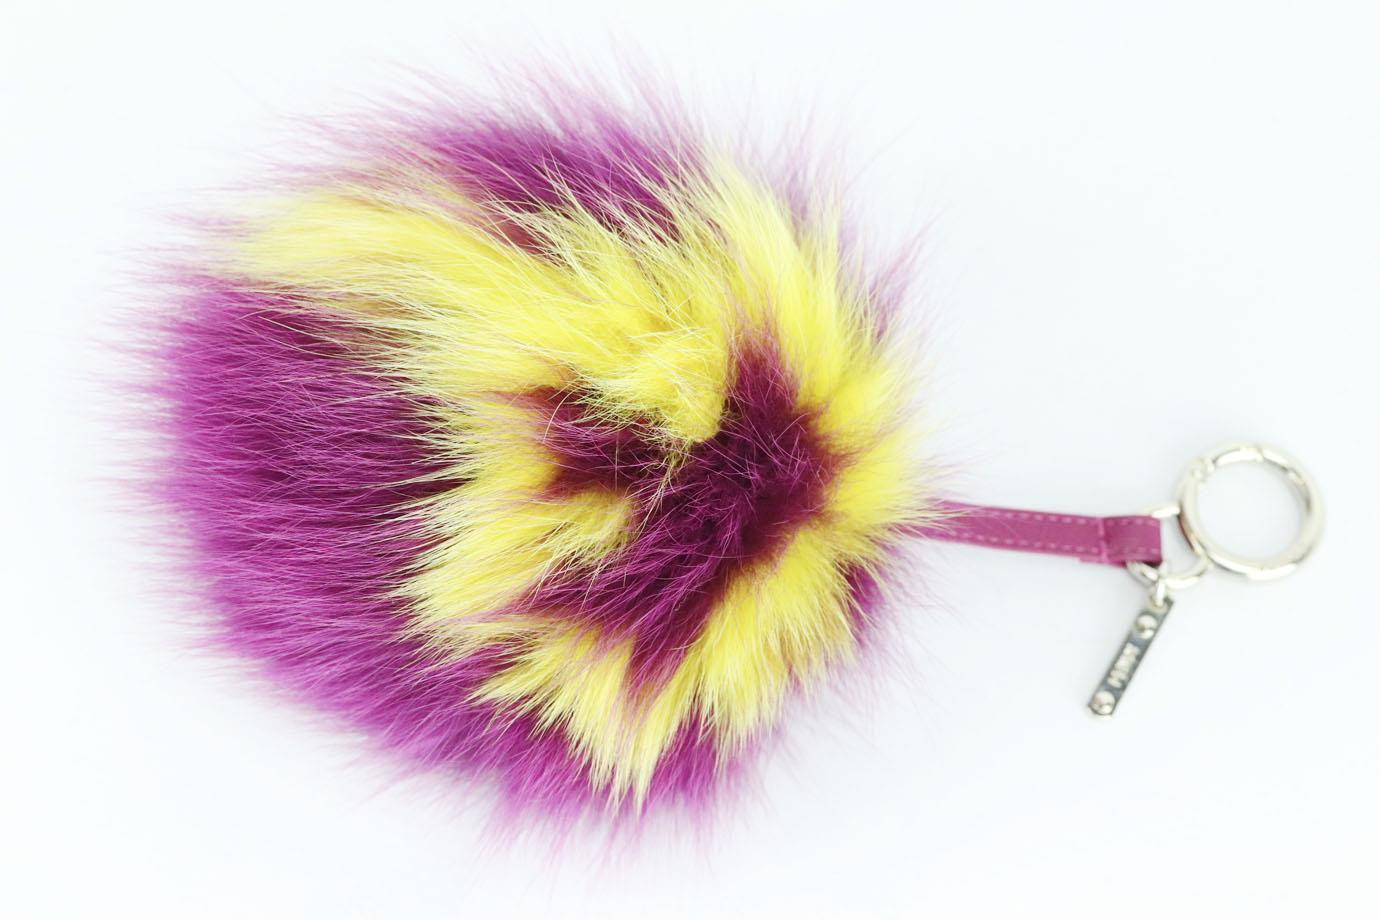 Fendi fox, rabbit fur and leather bag charm. Tonal-pink and white. Lobster clasp fastening at top. Does not come with dustbag or box. Height: 9 in. Width: 5.5 in
